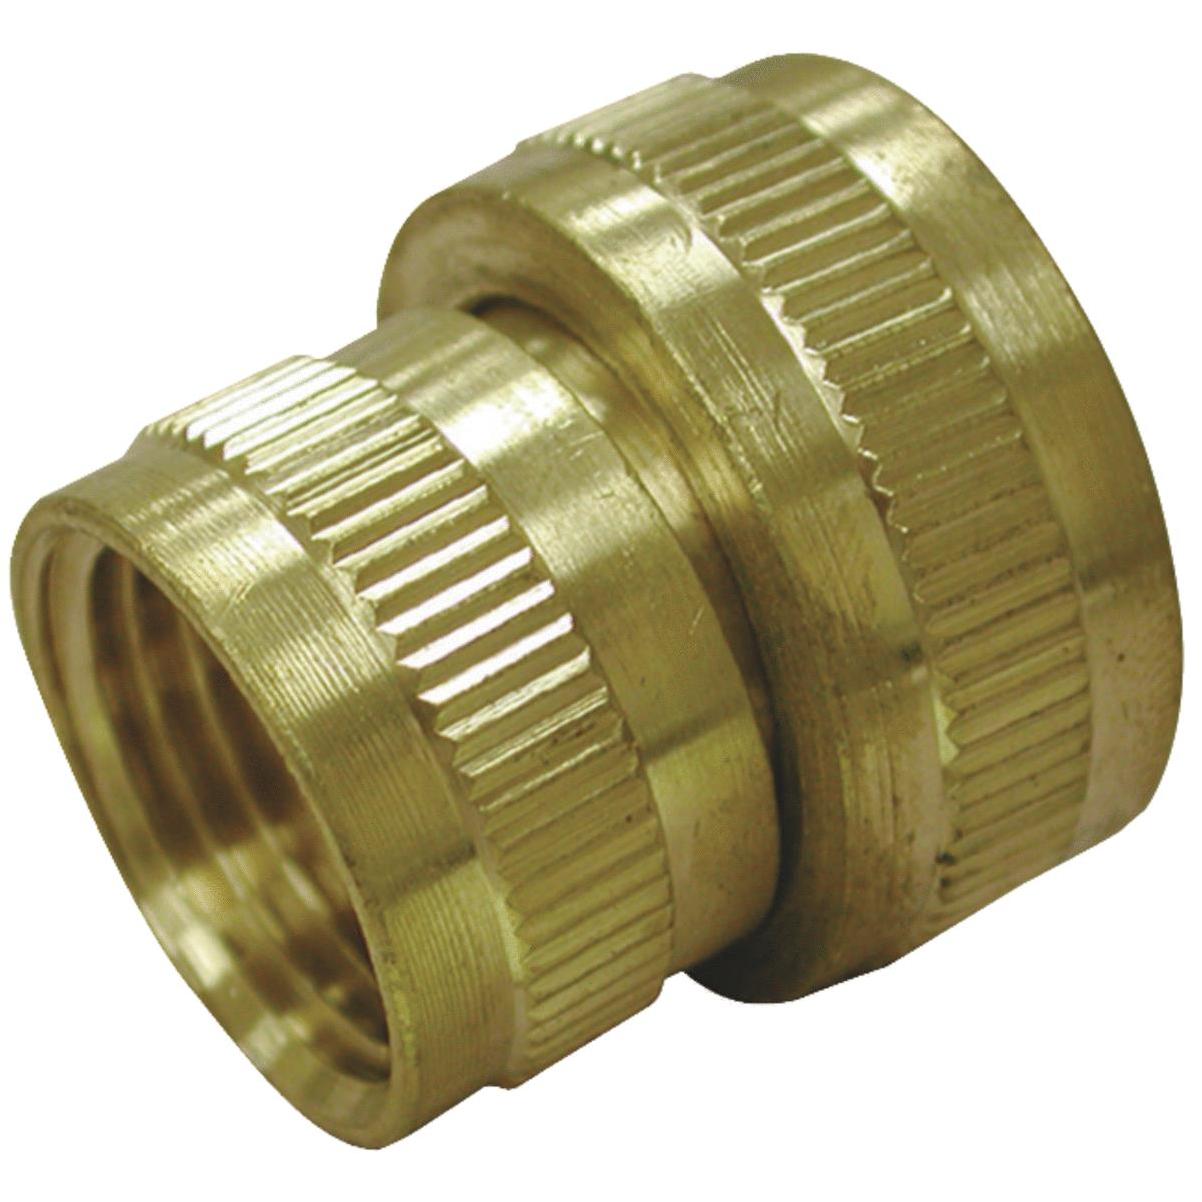 Anderson Metals Brass Garden Hose Fitting, Connector, 1/2 Barb x 3/4 Male  Hose